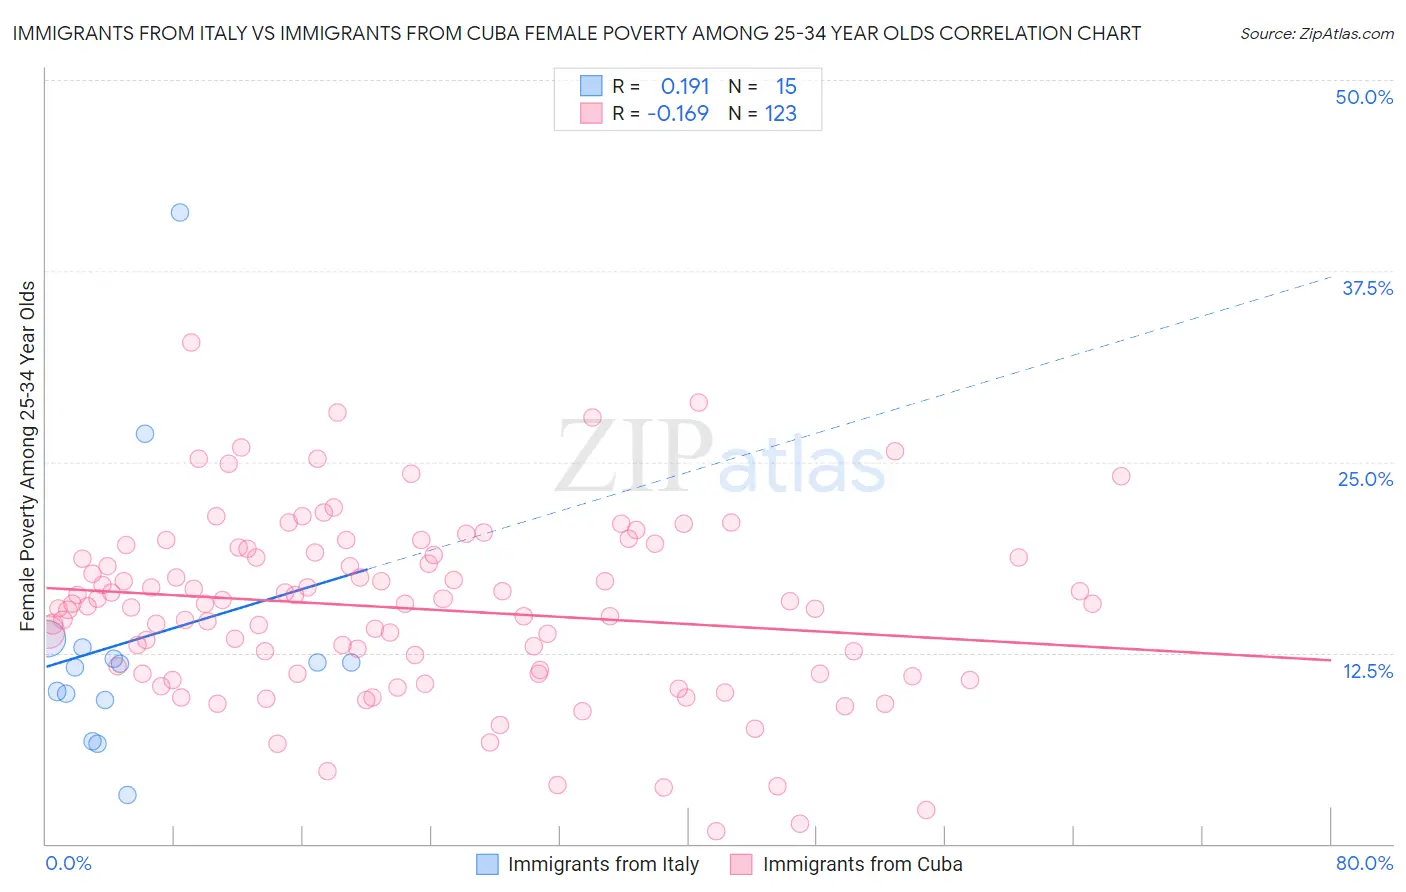 Immigrants from Italy vs Immigrants from Cuba Female Poverty Among 25-34 Year Olds